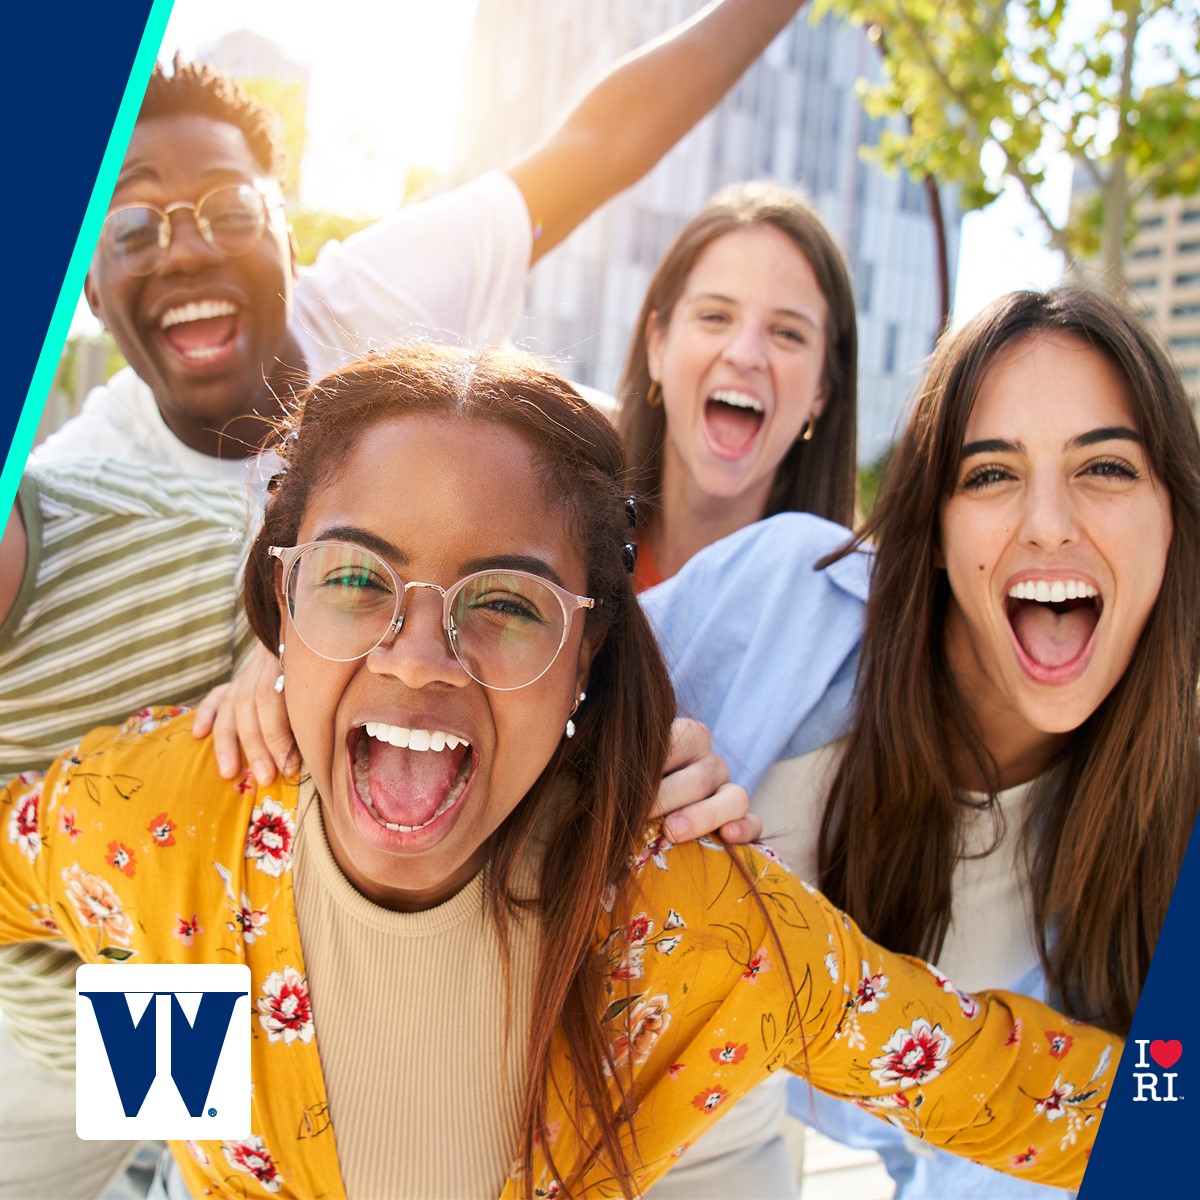 It's #CollegeDecisionDay and now that you've made your choice, we have some tool & tips that can help you plan for Fall▶️ow.ly/V4l950Ru9h8 ▶️Hidden Costs of College Life ▶️Build Summer Savings ▶️Student Checking ▶️P2P What we value is you.™ #WashTrust #collegebound